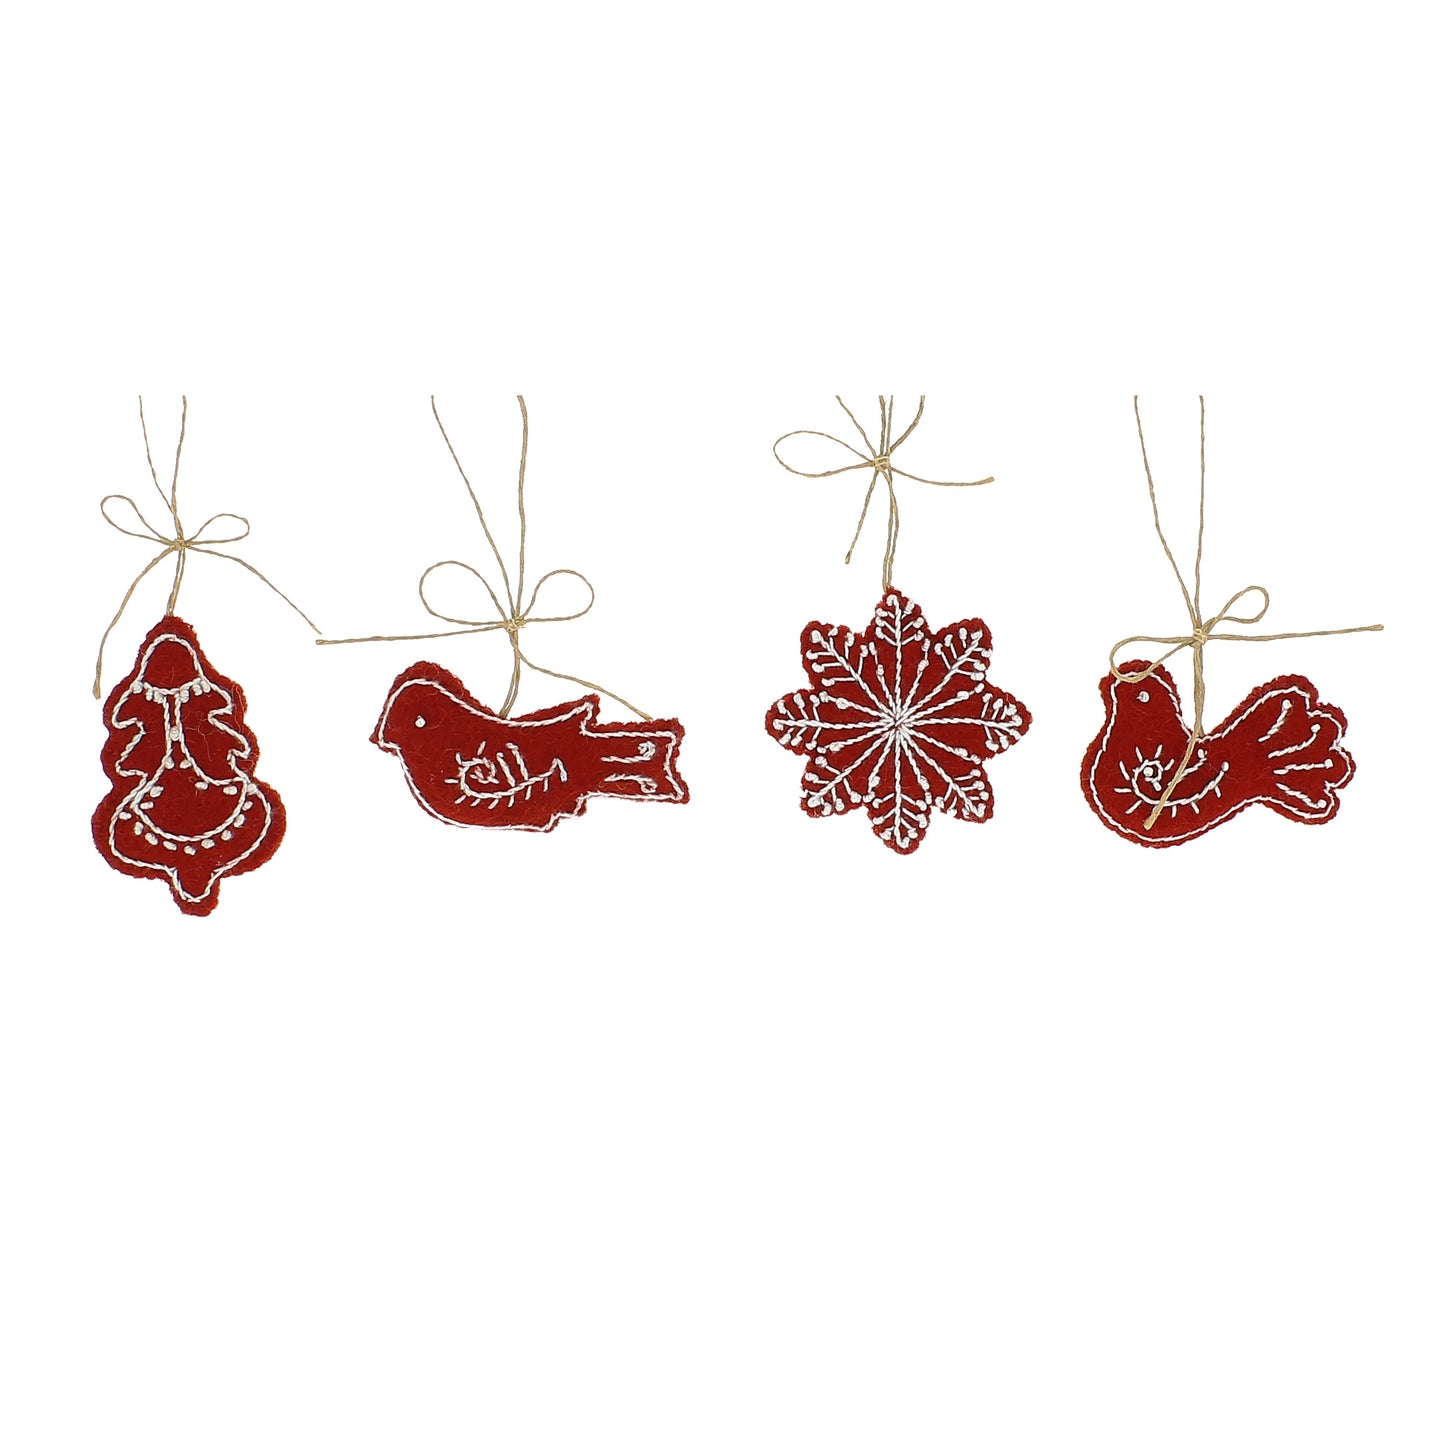 Gingerbread Hanging Decorations - Red - Set of 4